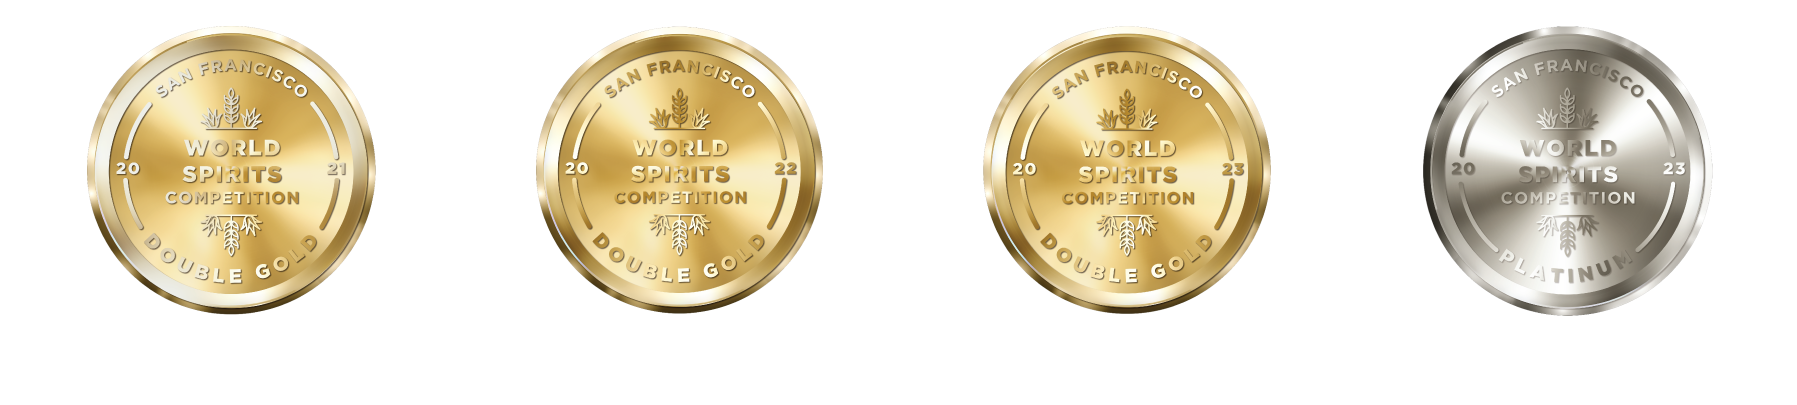 San Francisco World Spirits Competition medals from 2021, 2022, and 2023